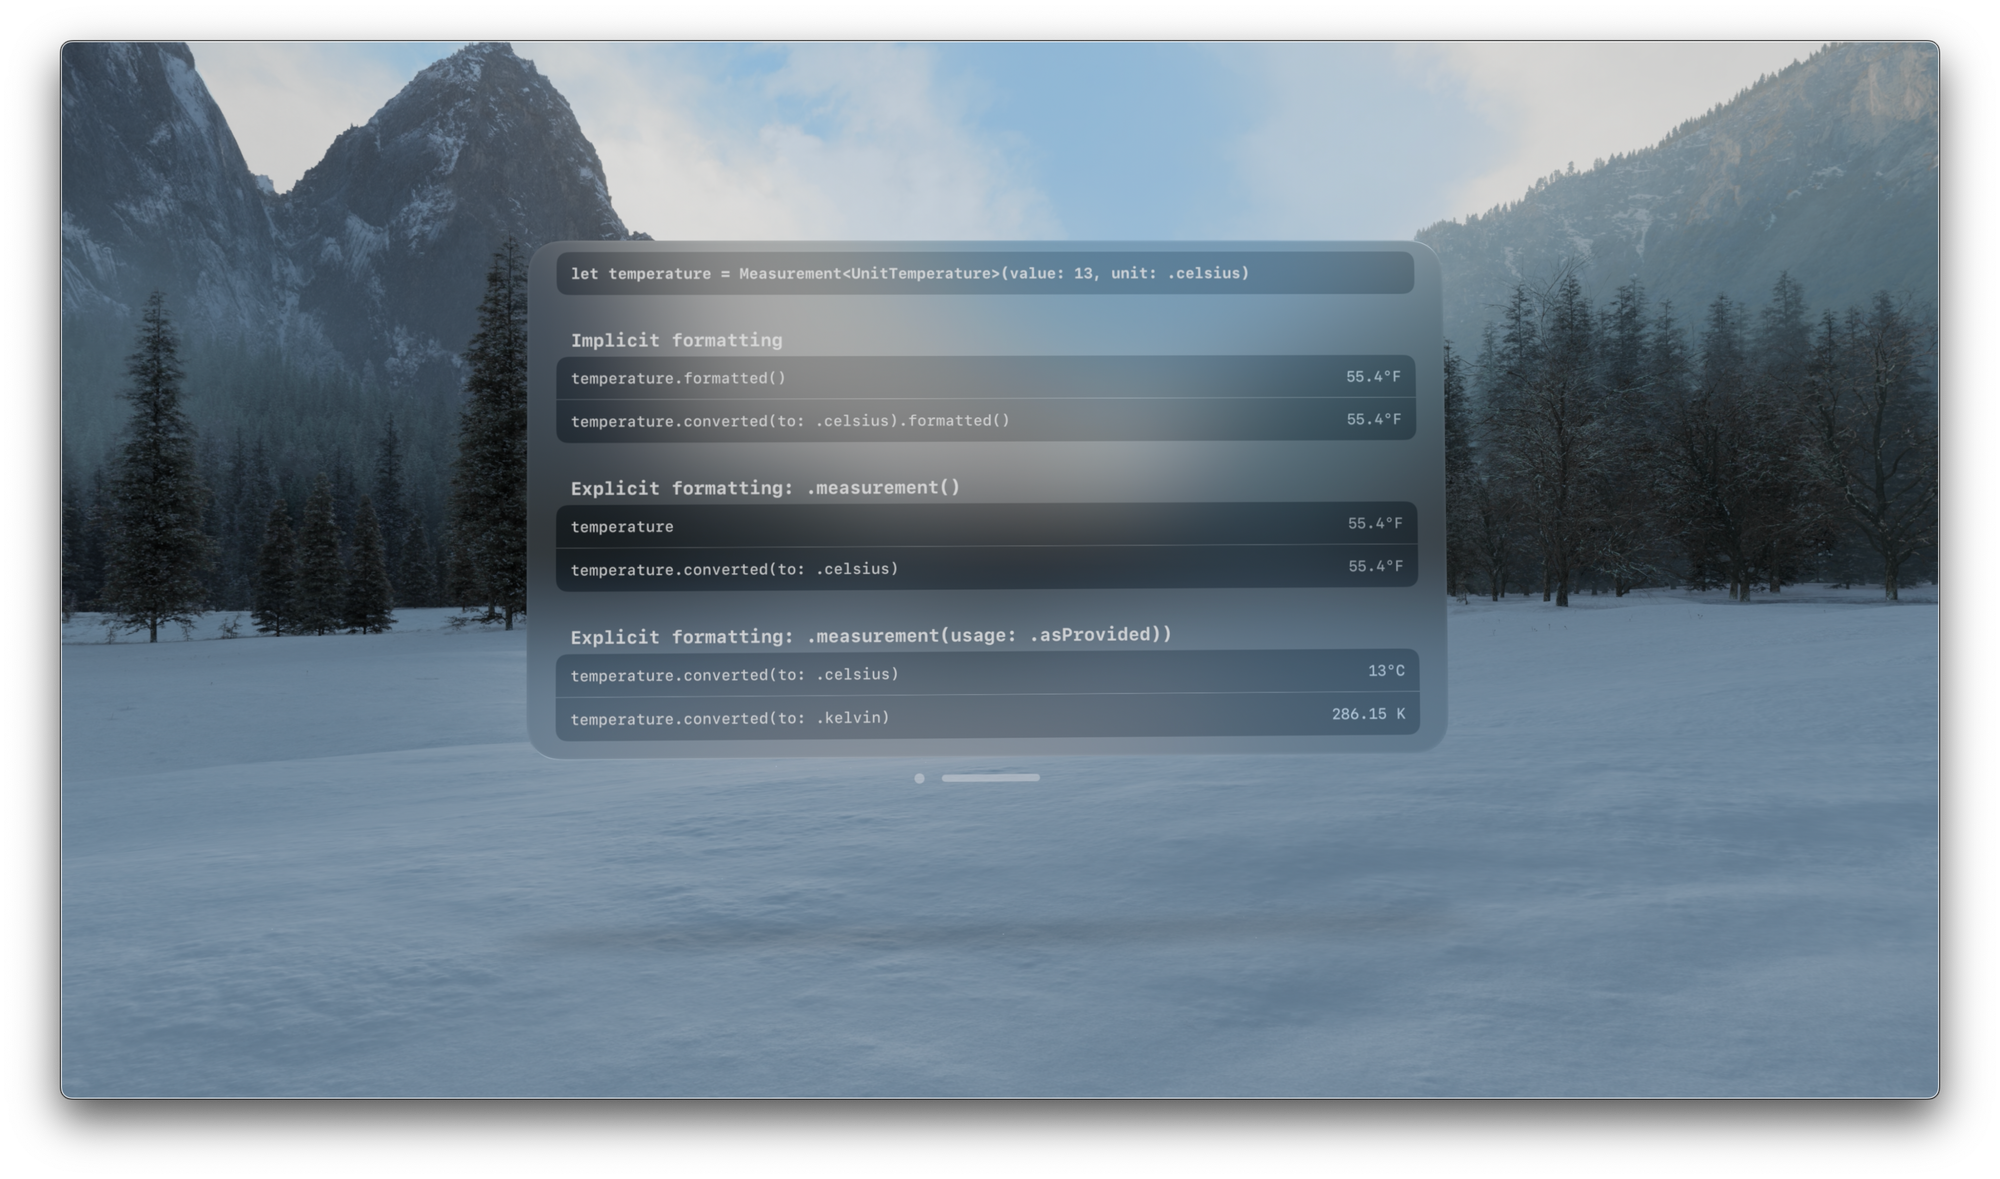 A screenshot of a window in Yosemite's immersive environment at morning indicates a cold temperature of 14ºC, however the system first displays it as ºF untile .asThe provided formatter part is applied, resulting in the desired results in both Celsius and Kelvin for this test.